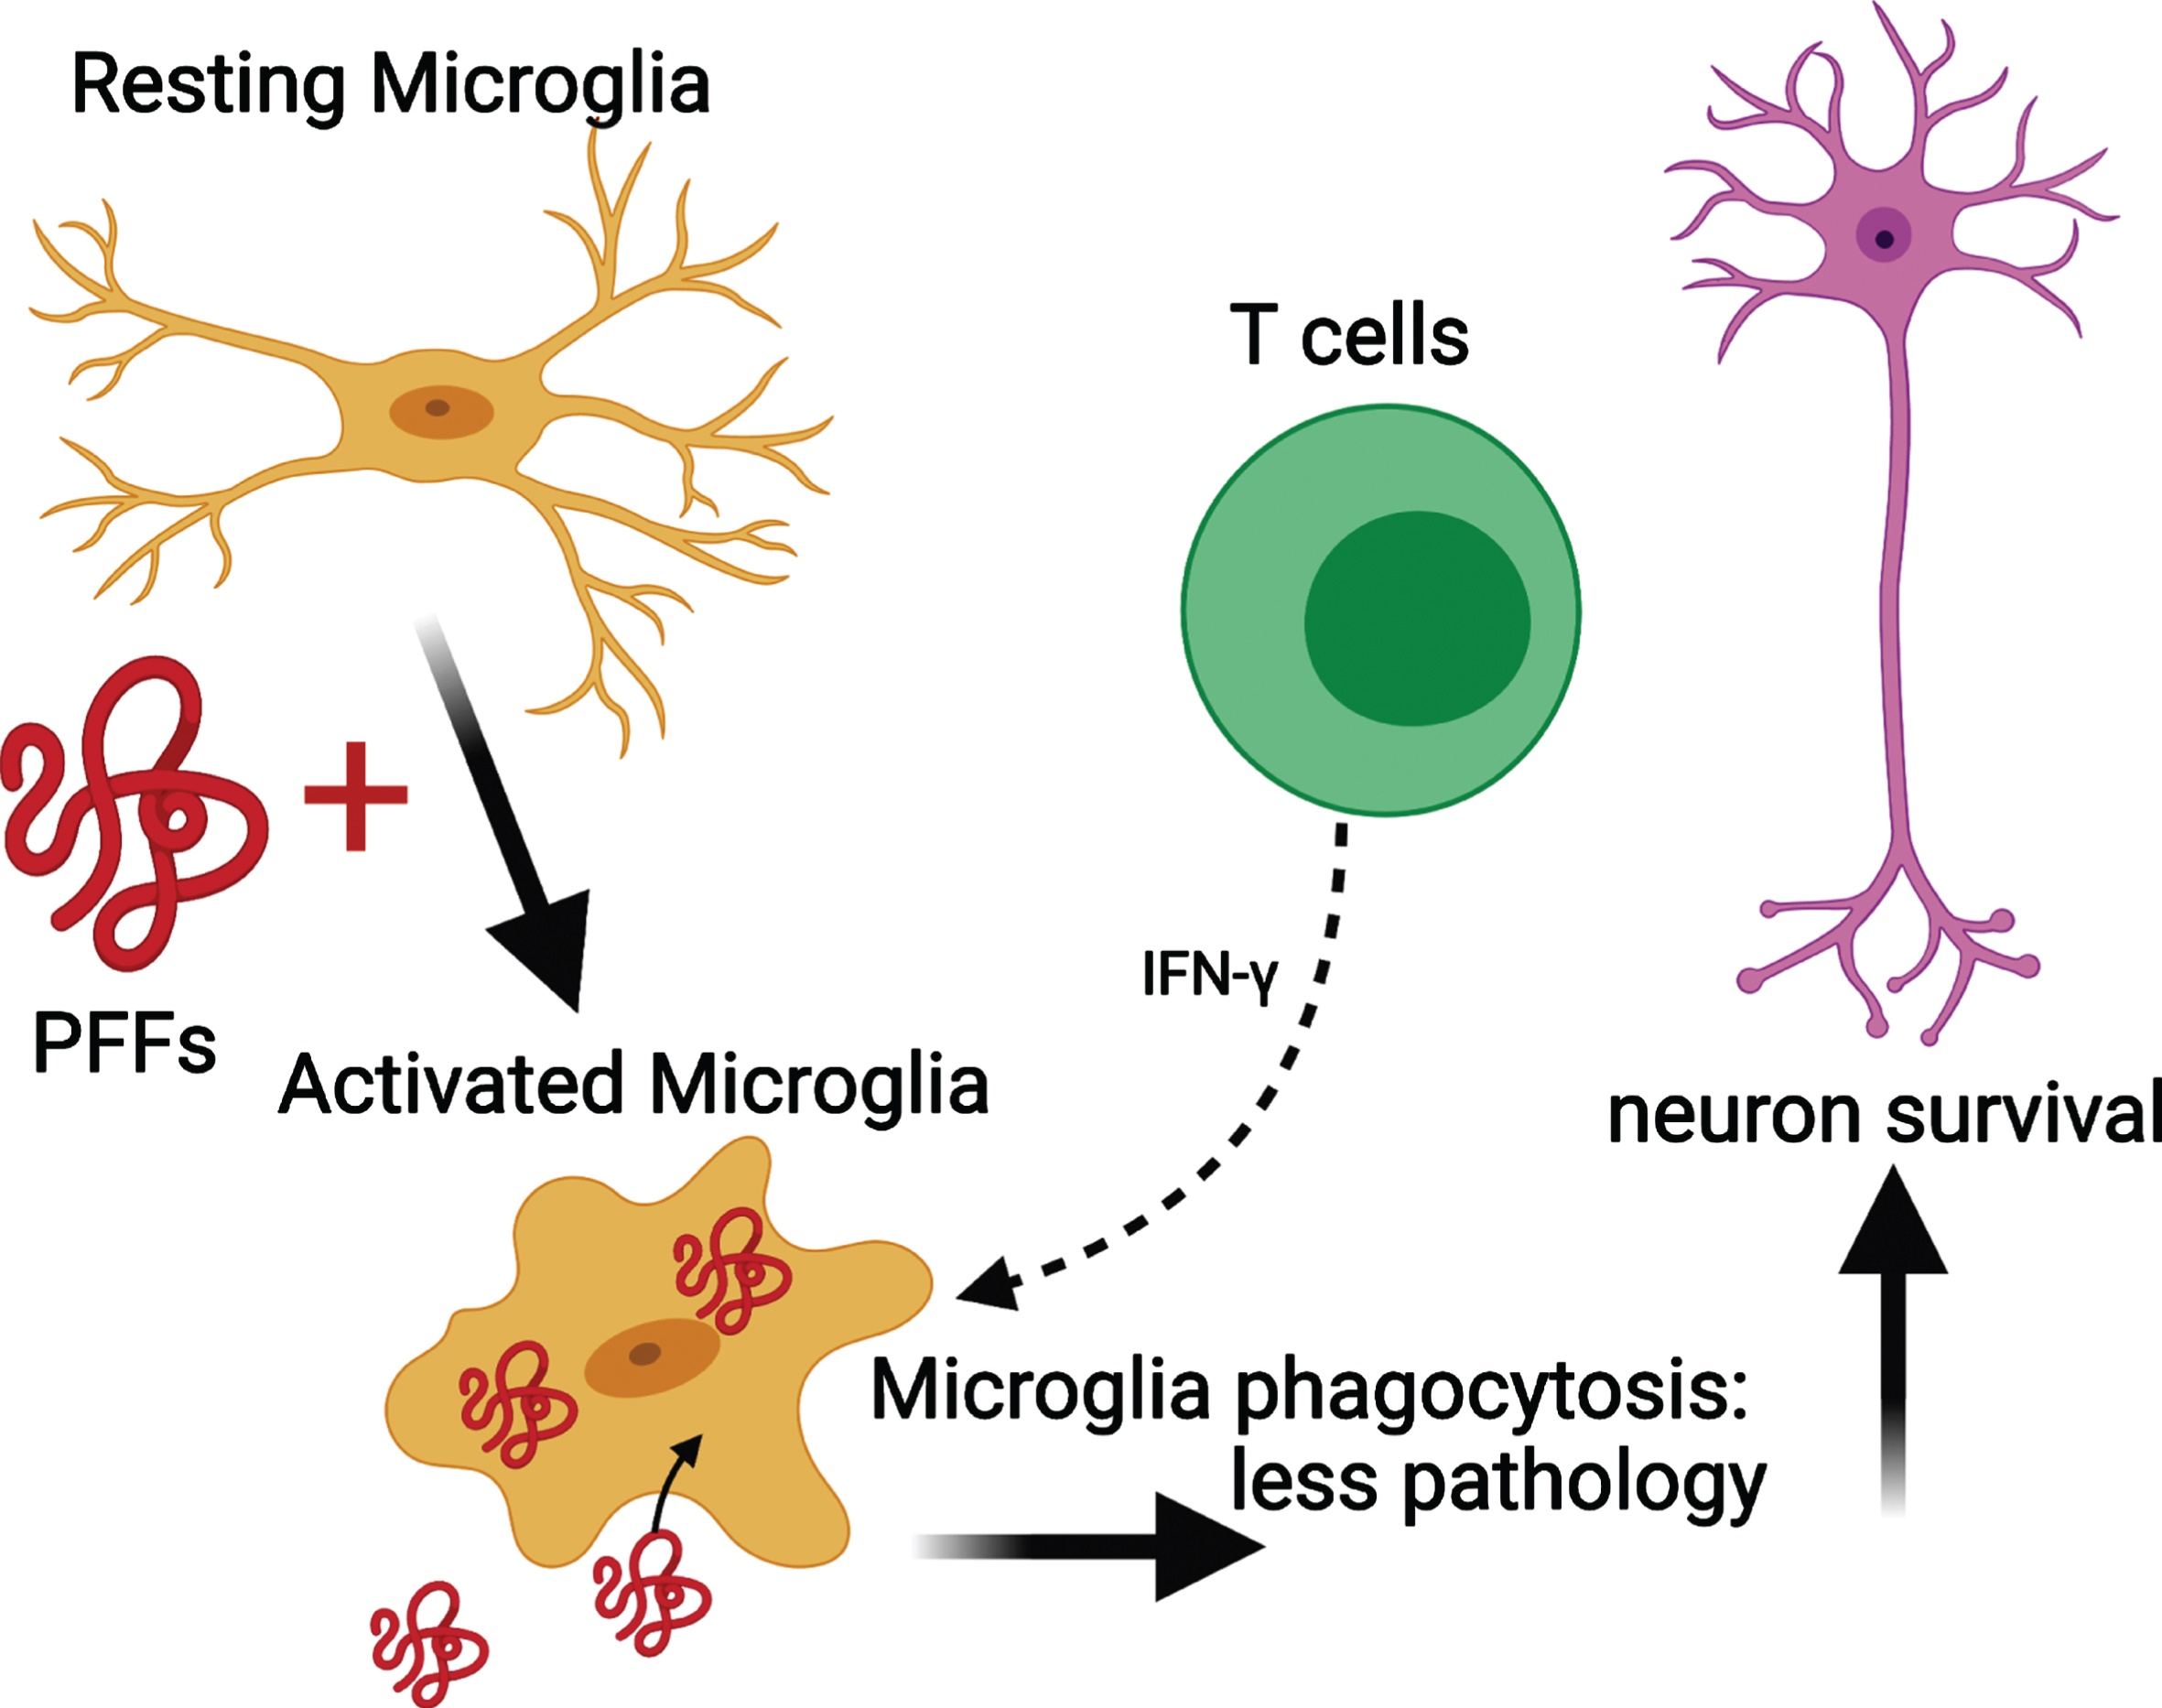 Mechanism for the reduced phosphorylated α-syn pathology in immunocompromised mice that received adoptive transfer of T cells. PFFs activate resting microglia to become active and phagocytose PFFs. The presence of T cells releasing IFN-γ helps to further activate microglia and enhance phagocytosis. This results in less pathology and neuronal survival. Schematic created with BioRender.com.